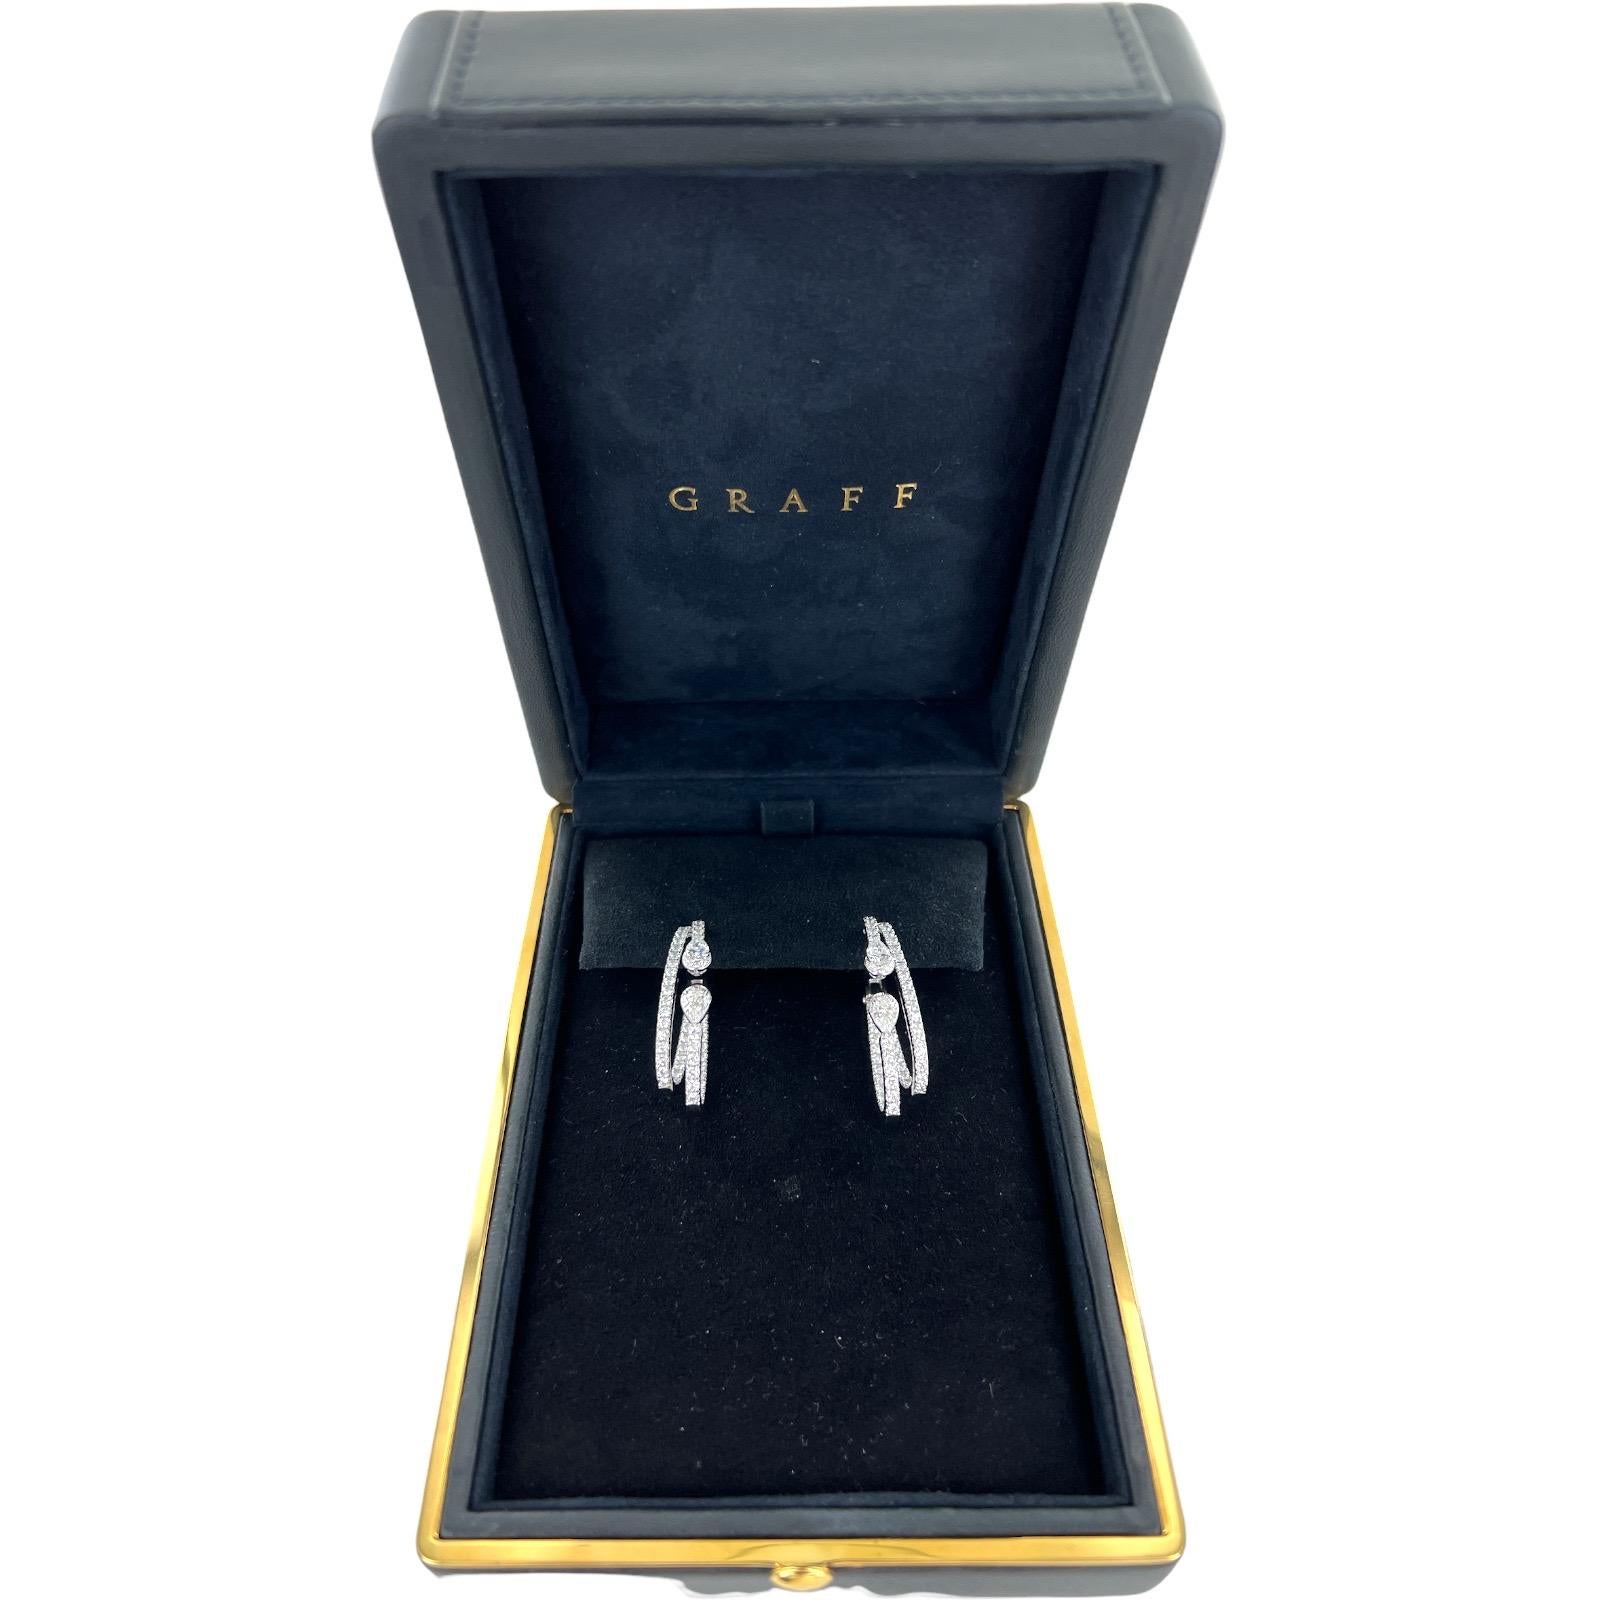 Stunning Duet Diamond Double Hoop earrings by Graff. The modern earrings feature round brilliant and four pear shape diamonds weighing 3.85 CTW and graded D-F color and VVS clarity. The earrings measure 1.50 inches in length, feature lever-backs,